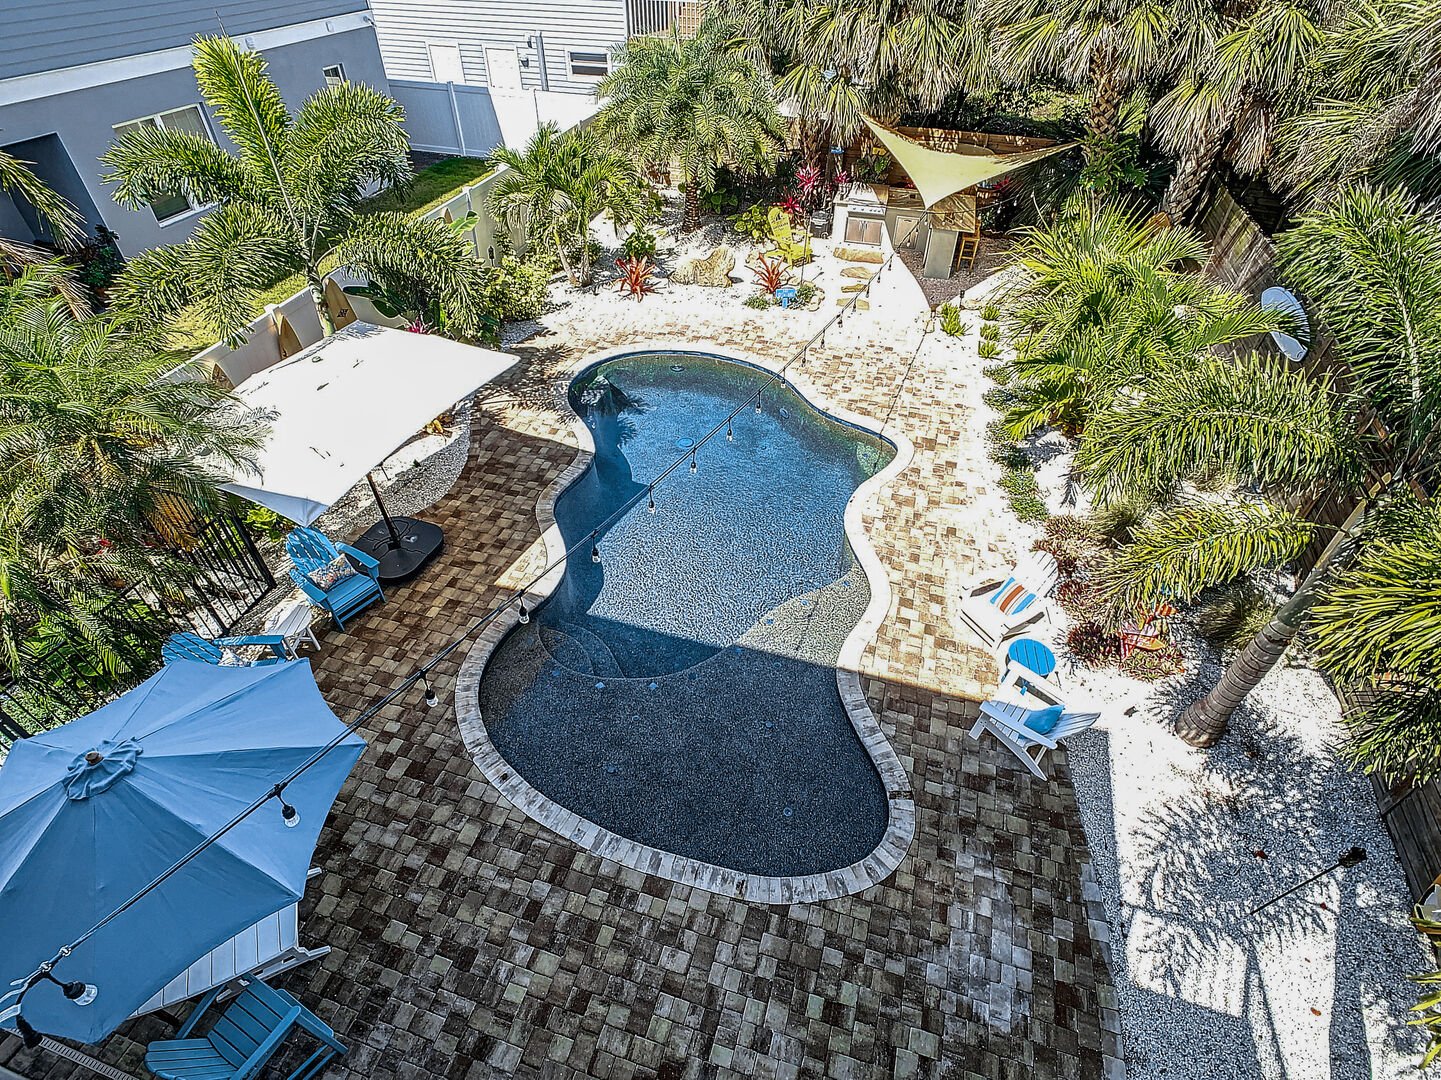 A bird eye view of the swimming pool